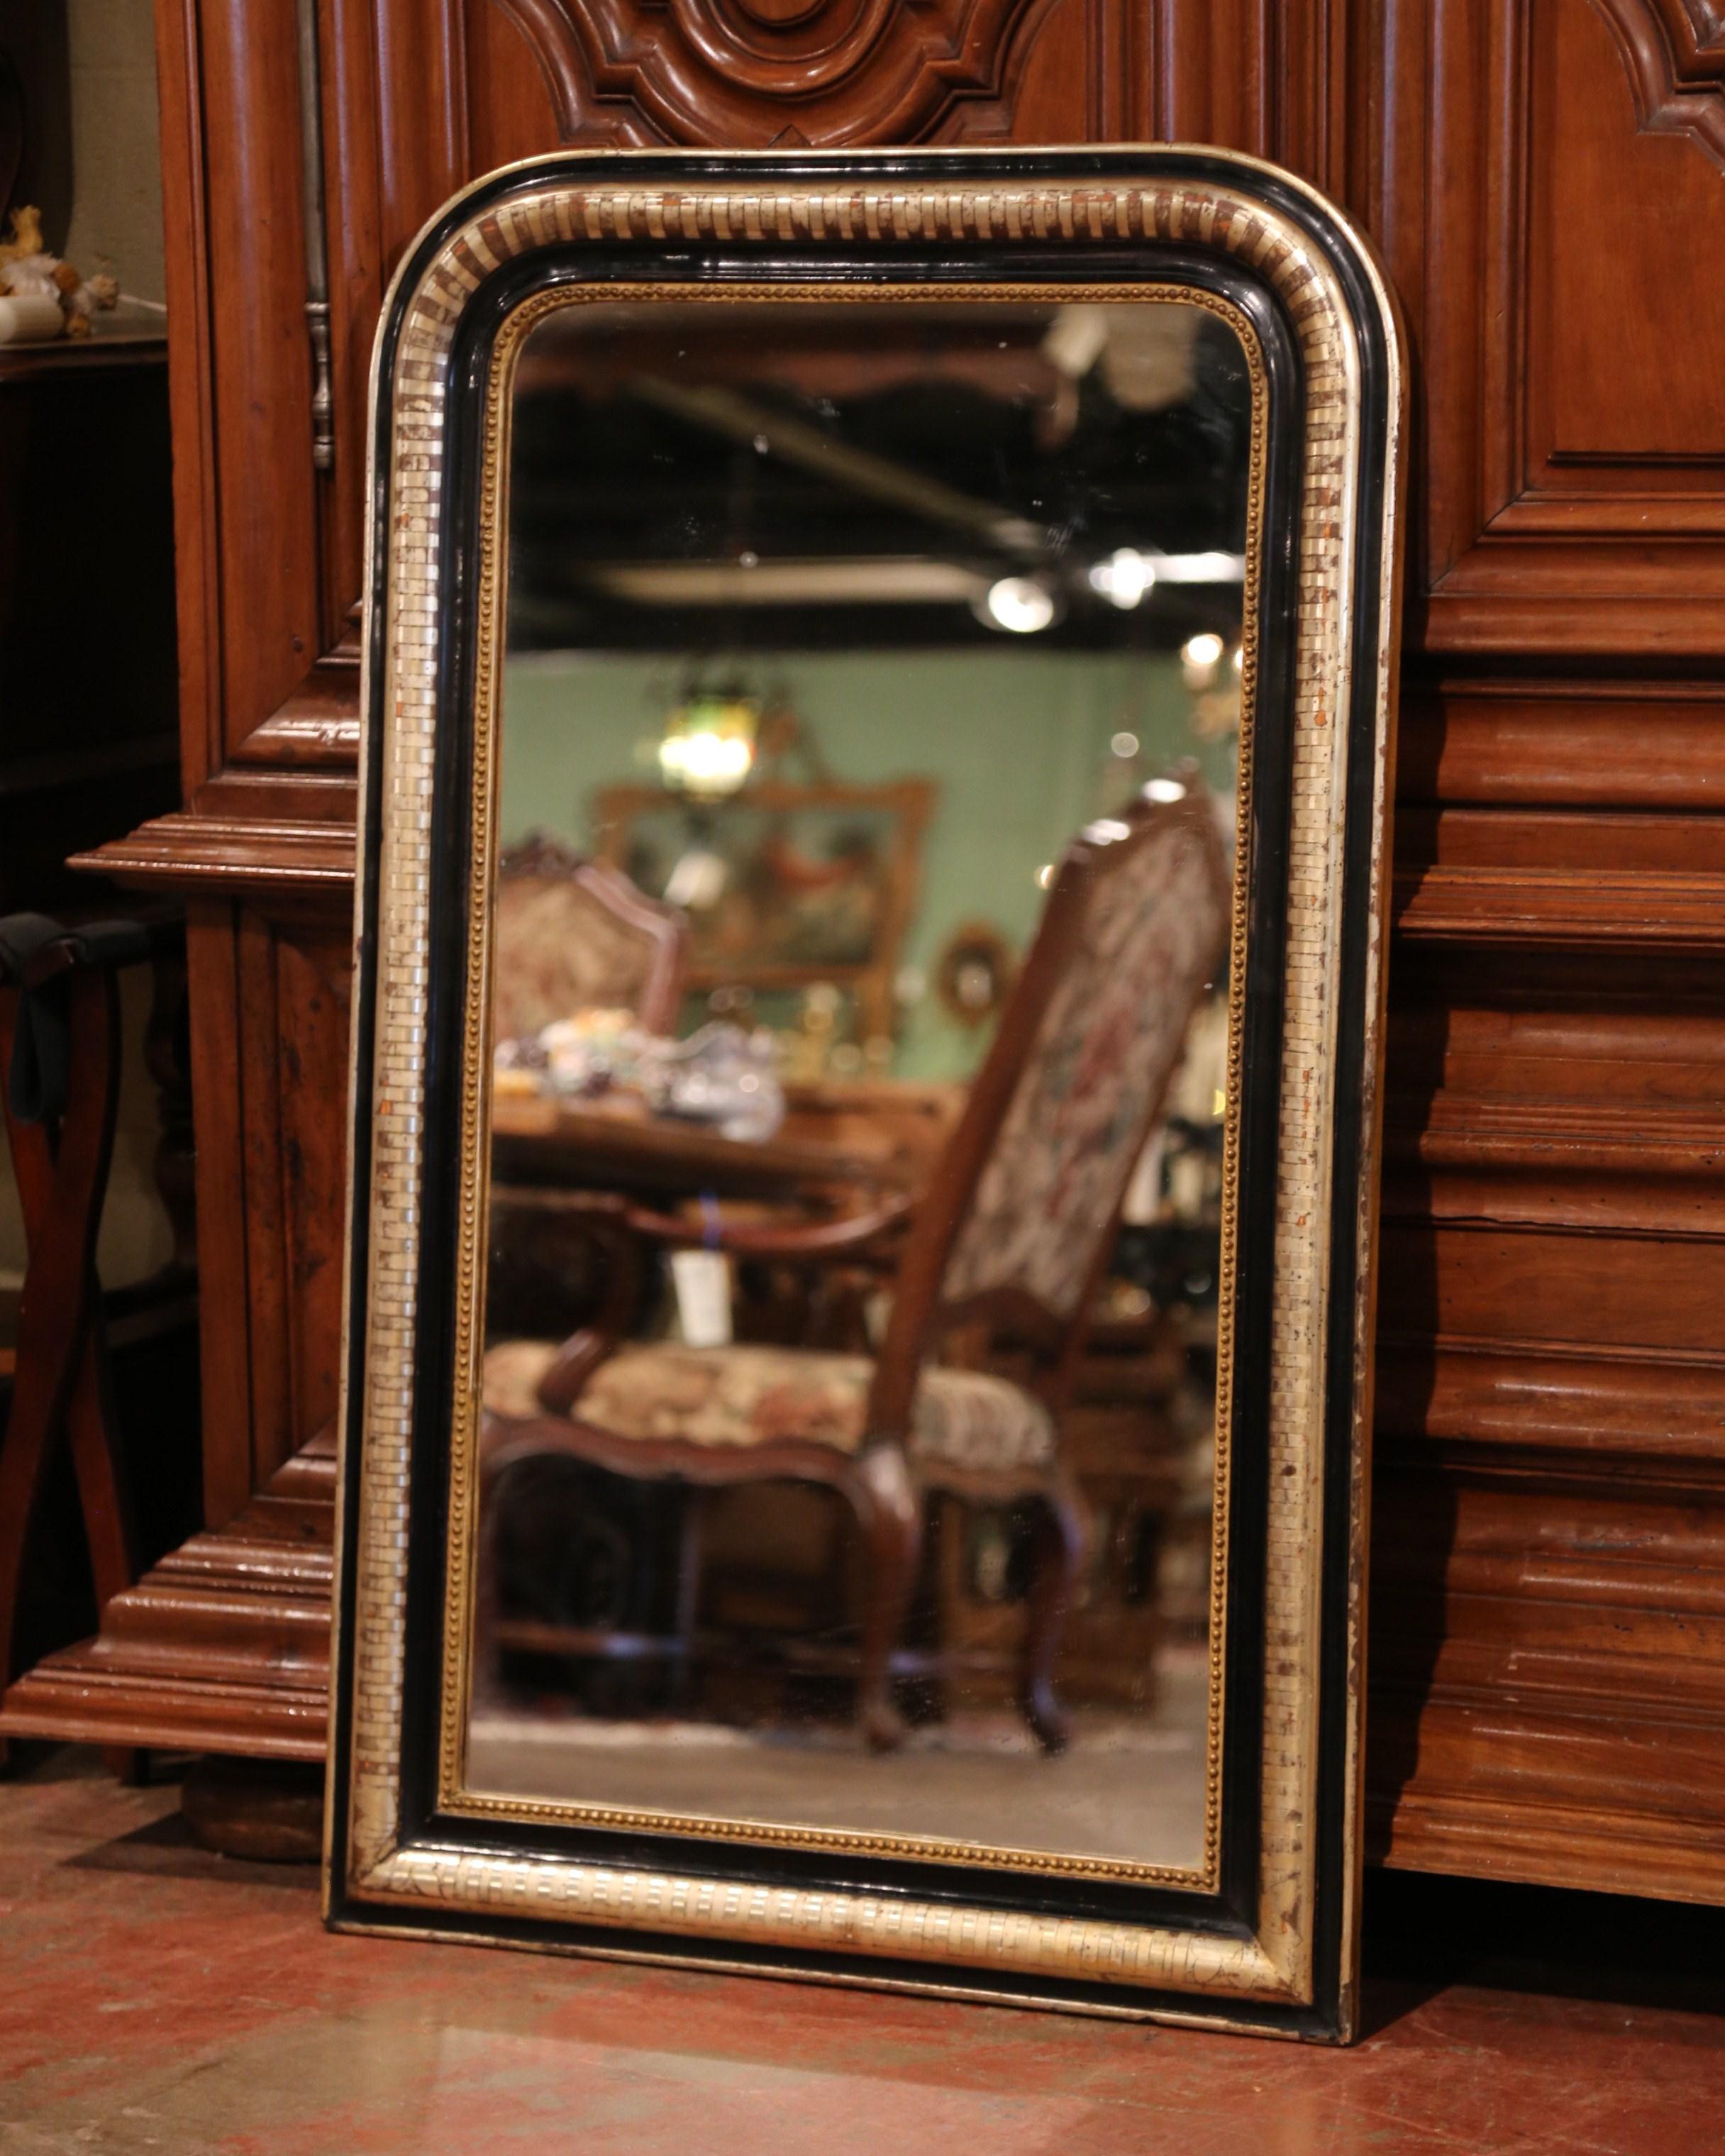 This elegant antique two-tone gold leaf and black lacquered mirror was crafted in France, circa 1860. The large frame is decorated with engraved stripe motif, and is further embellished with beads and gilt all around. The wall hanging piece is in